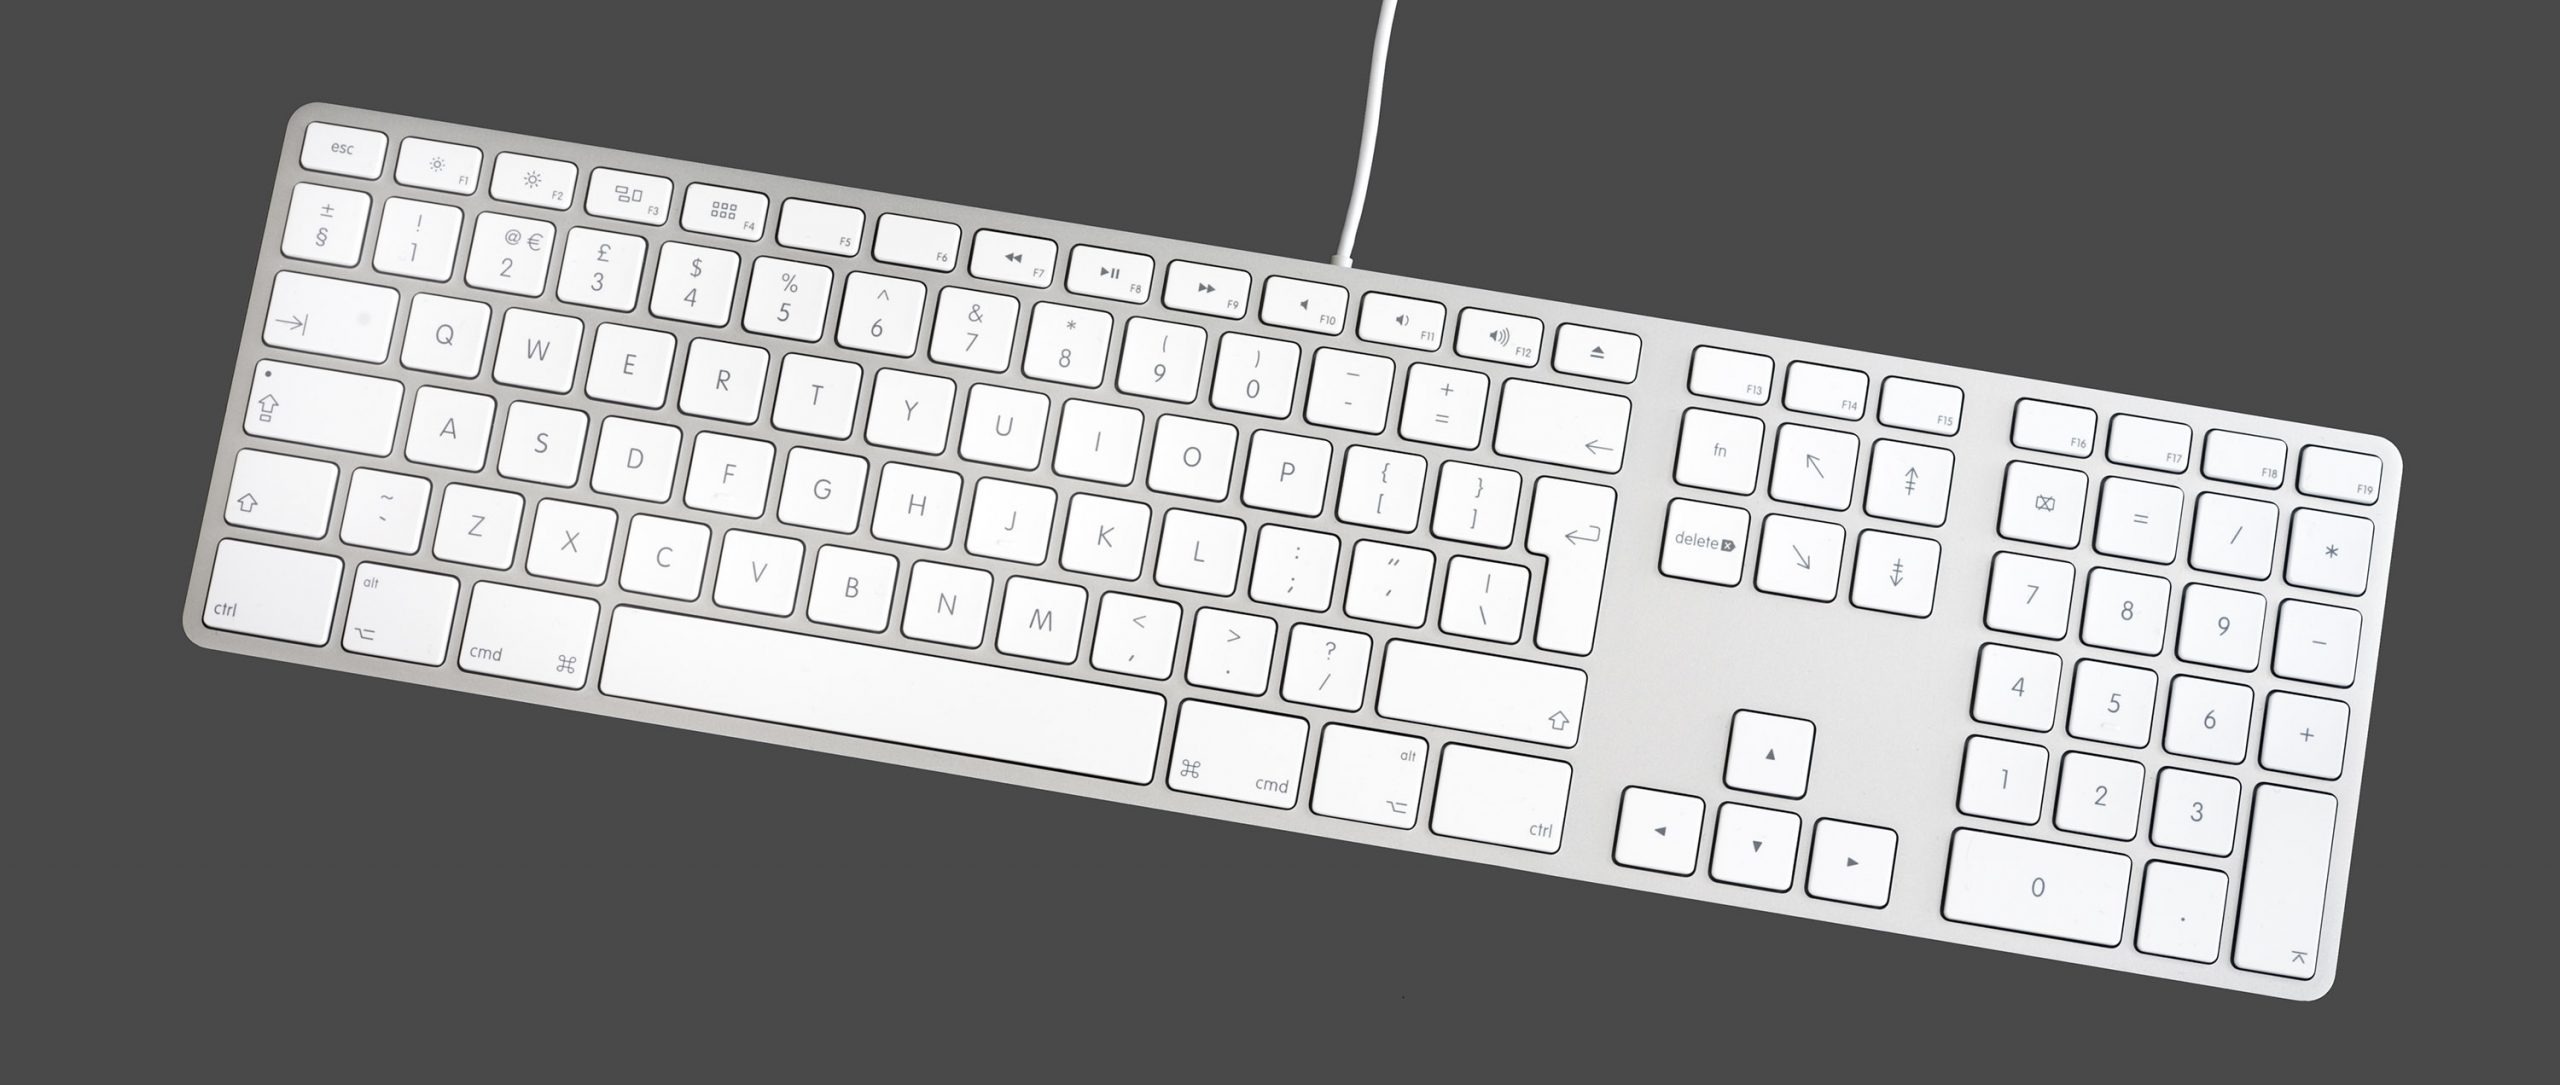 Apple Keyboard with Numeric Keyboard 9612 scaled